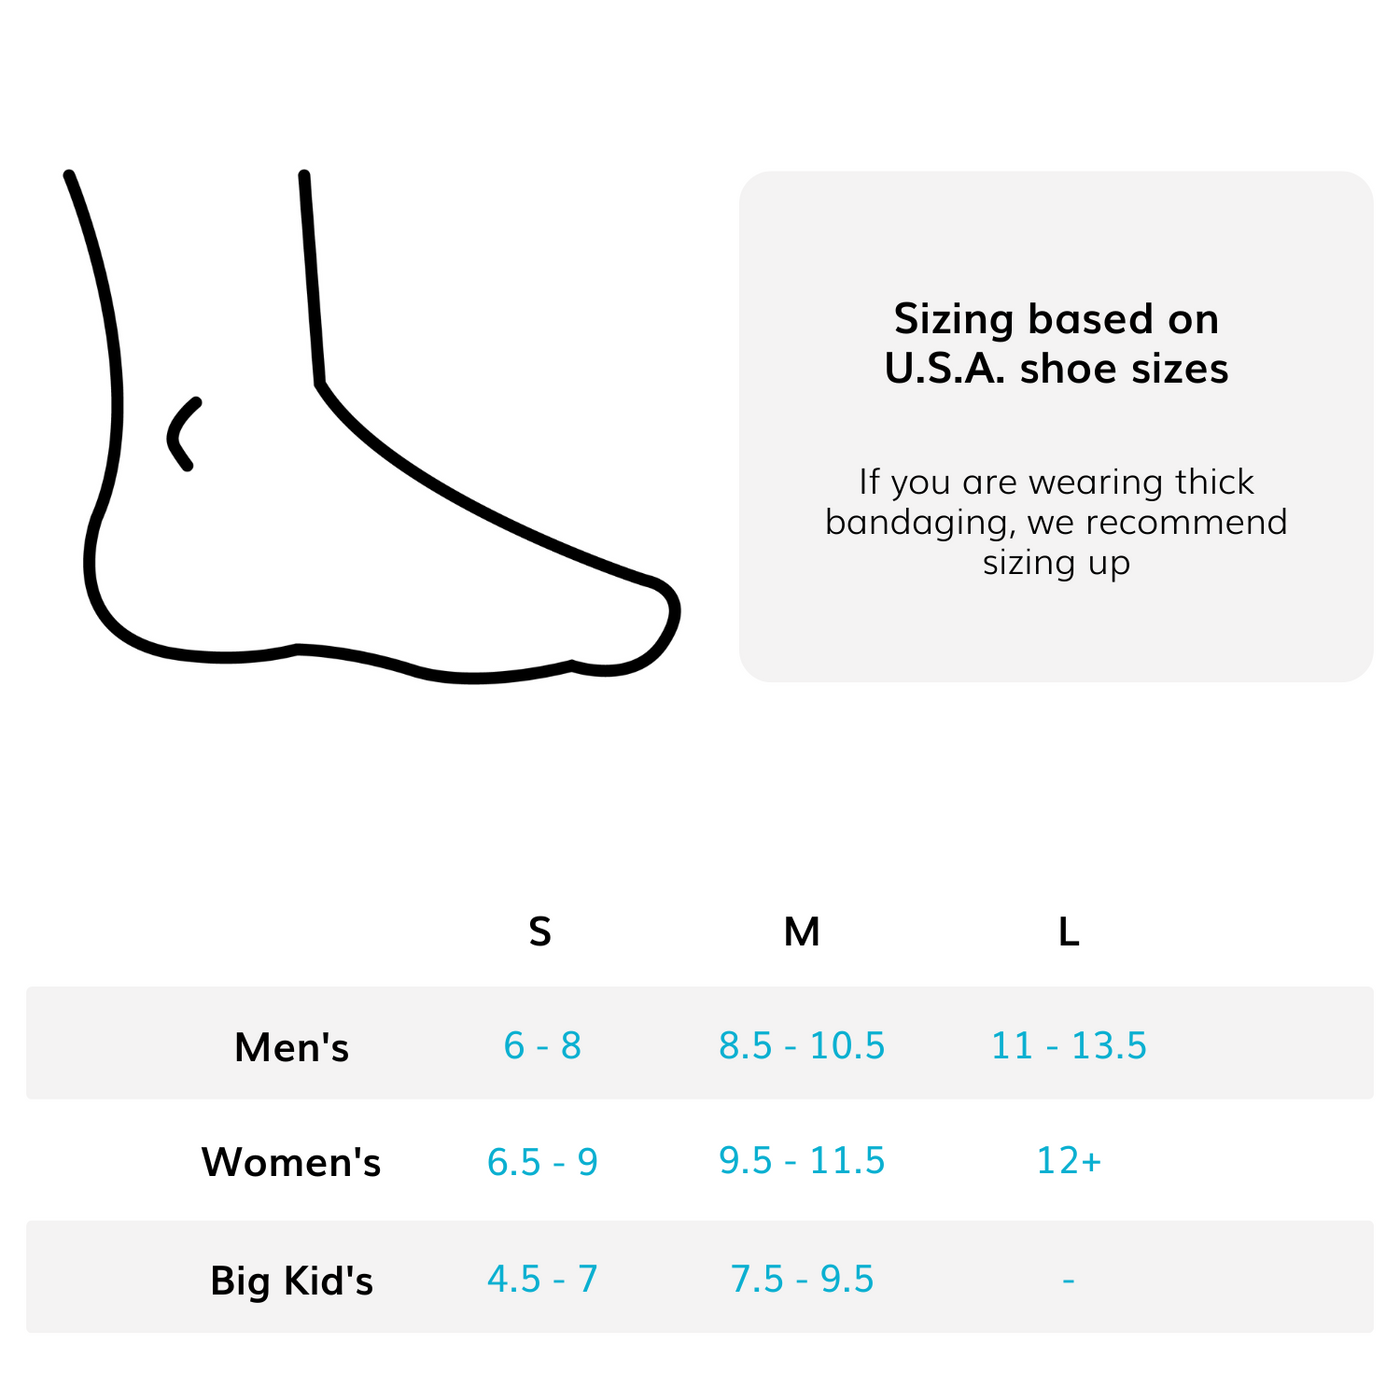 The sizing chart for the tall air walking boot comes in 3 sizes from size 6 up to size 13 US Shoe Size